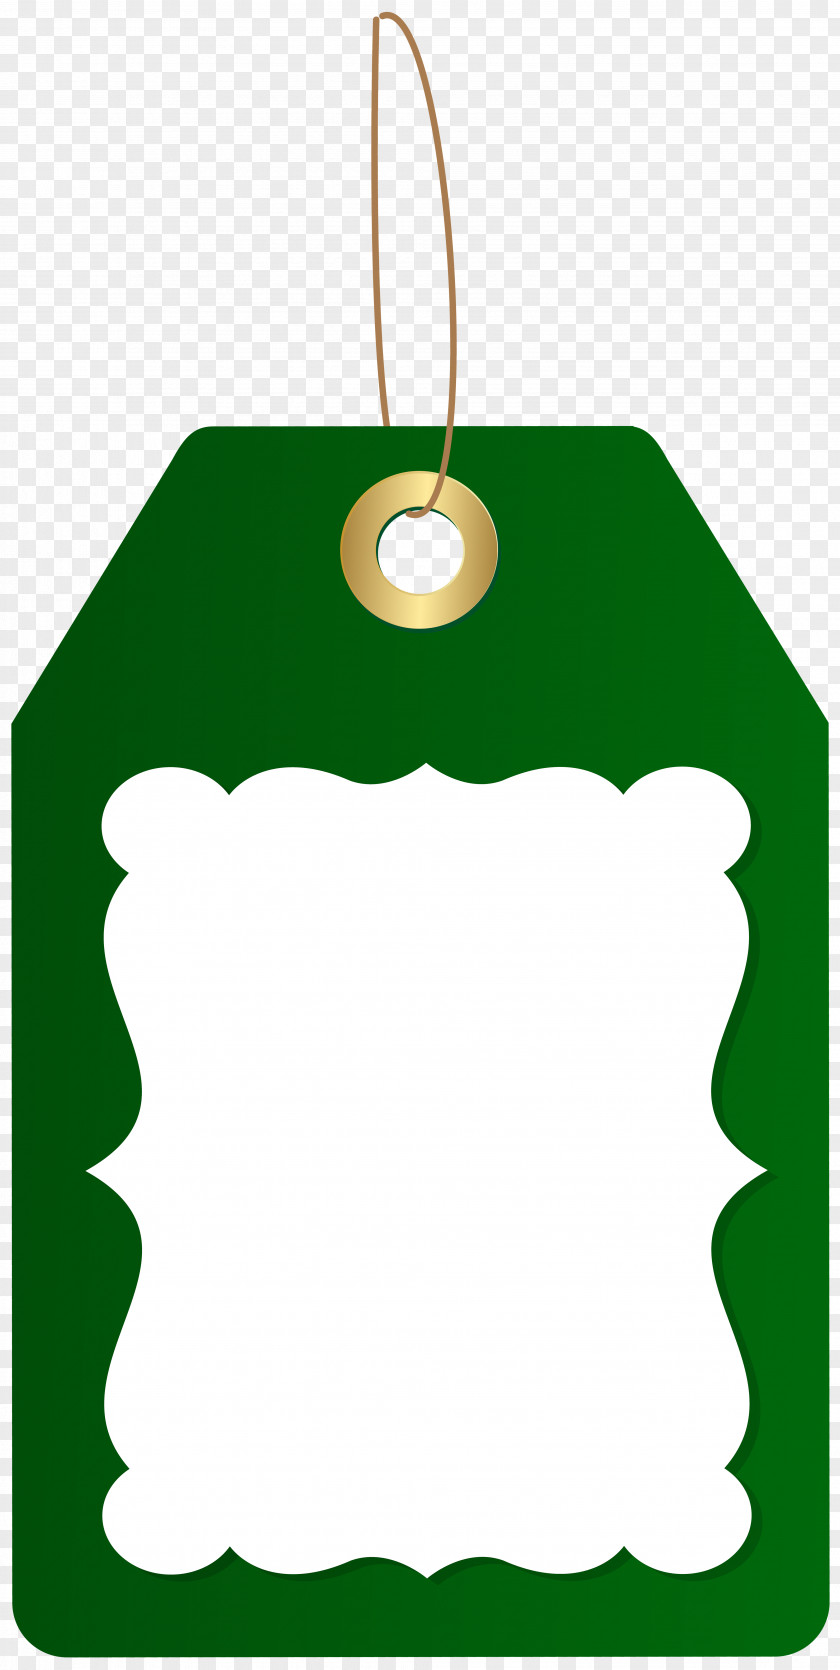 Green Deco Price Tag Clip Art Image PNG